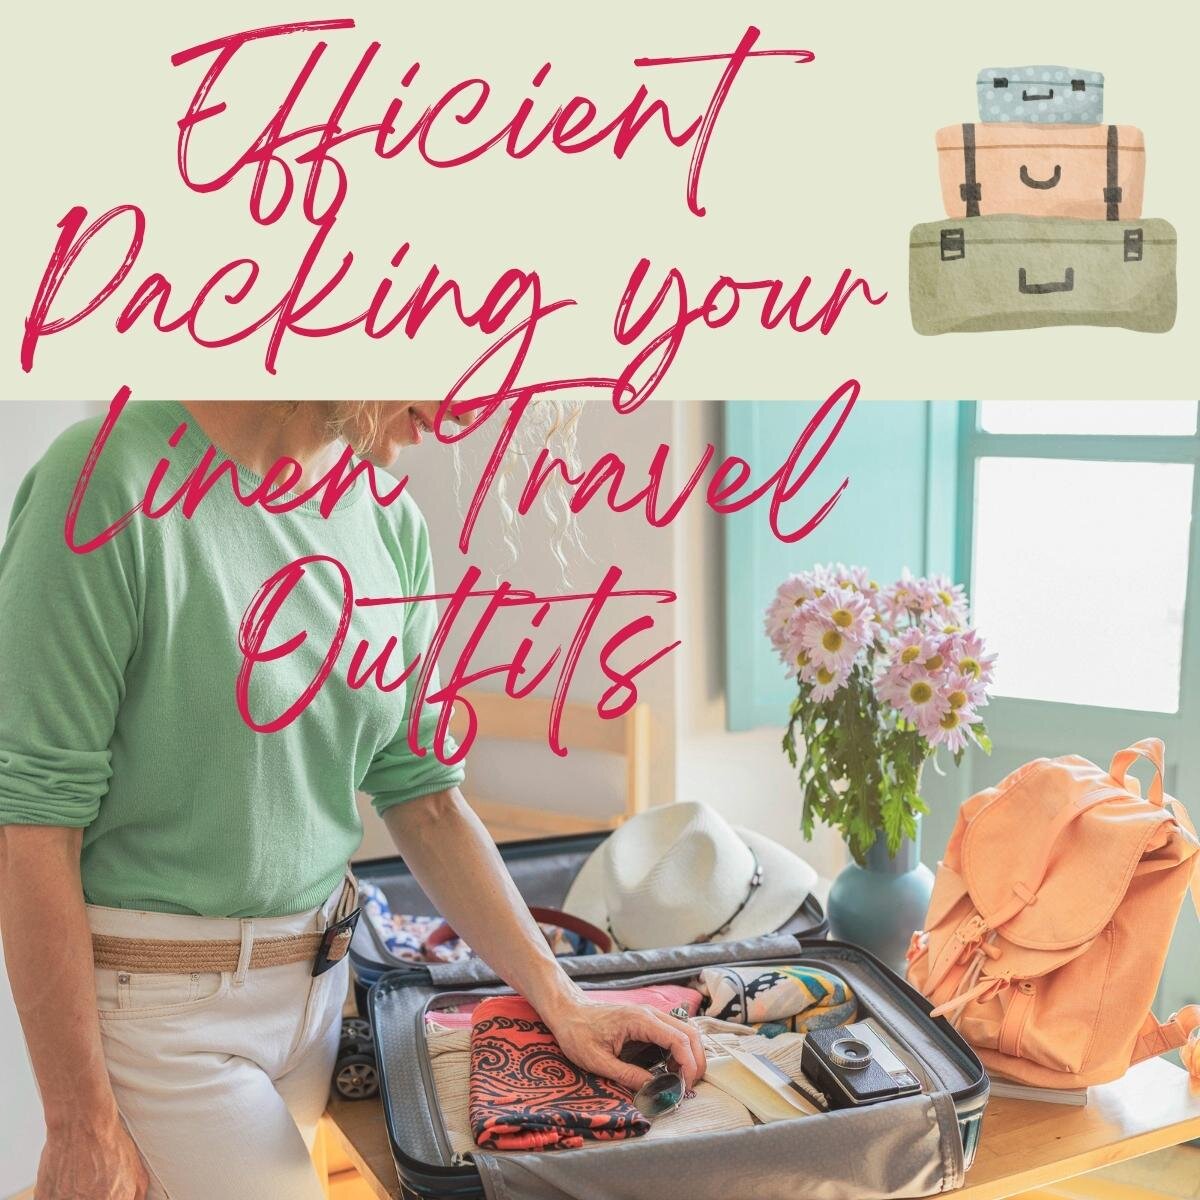 Efficient Packing your Linen Travel Outfits